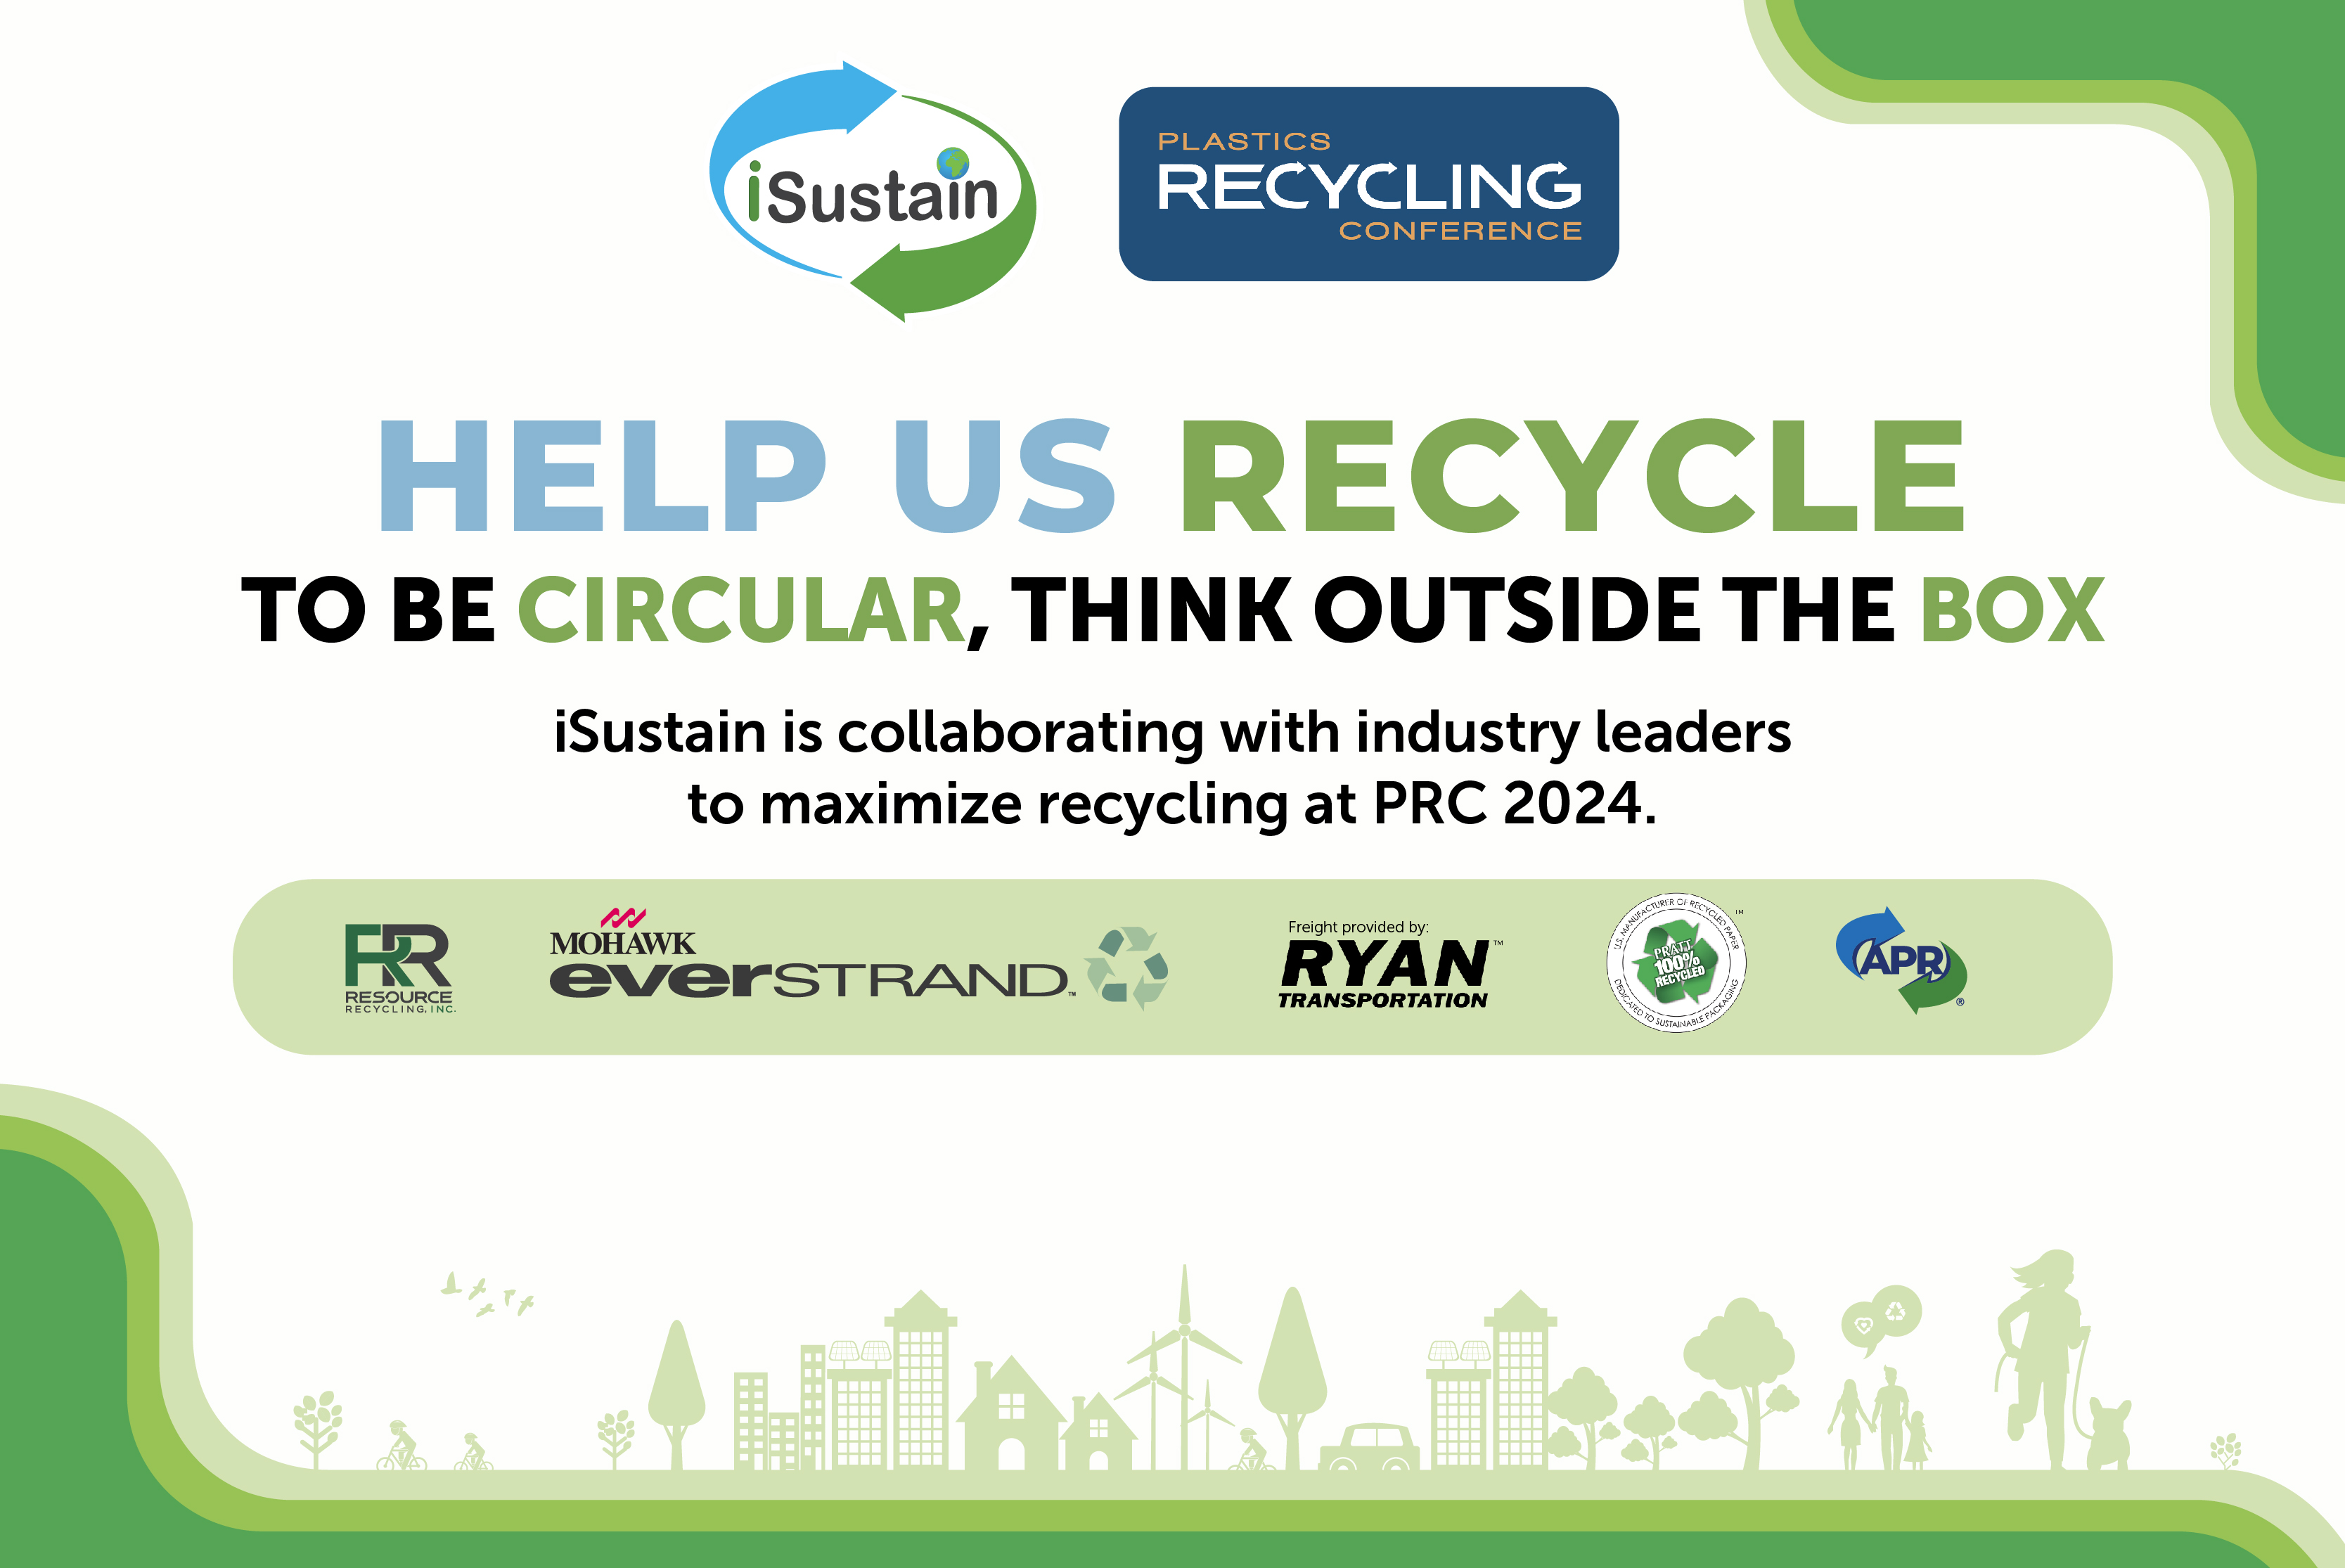 iSustain: Leading the Charge in On-Site Recycling at the 2024 Plastics Recycling Conference